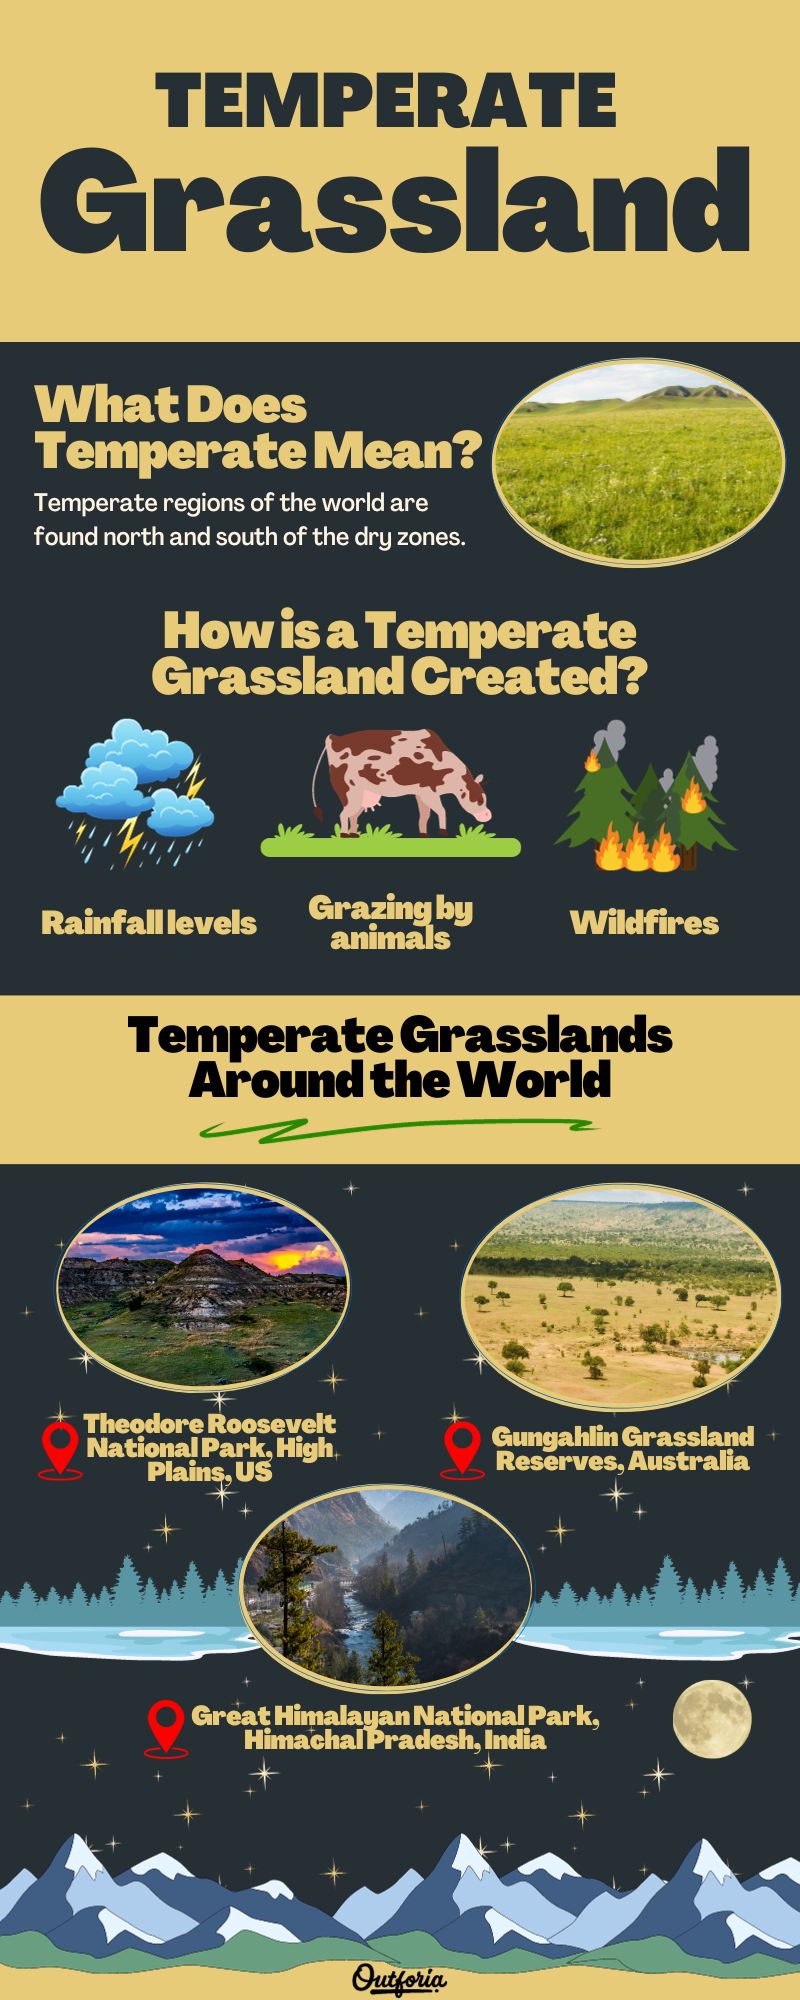 Chart of the Temperate grassland complete with pictures and facts